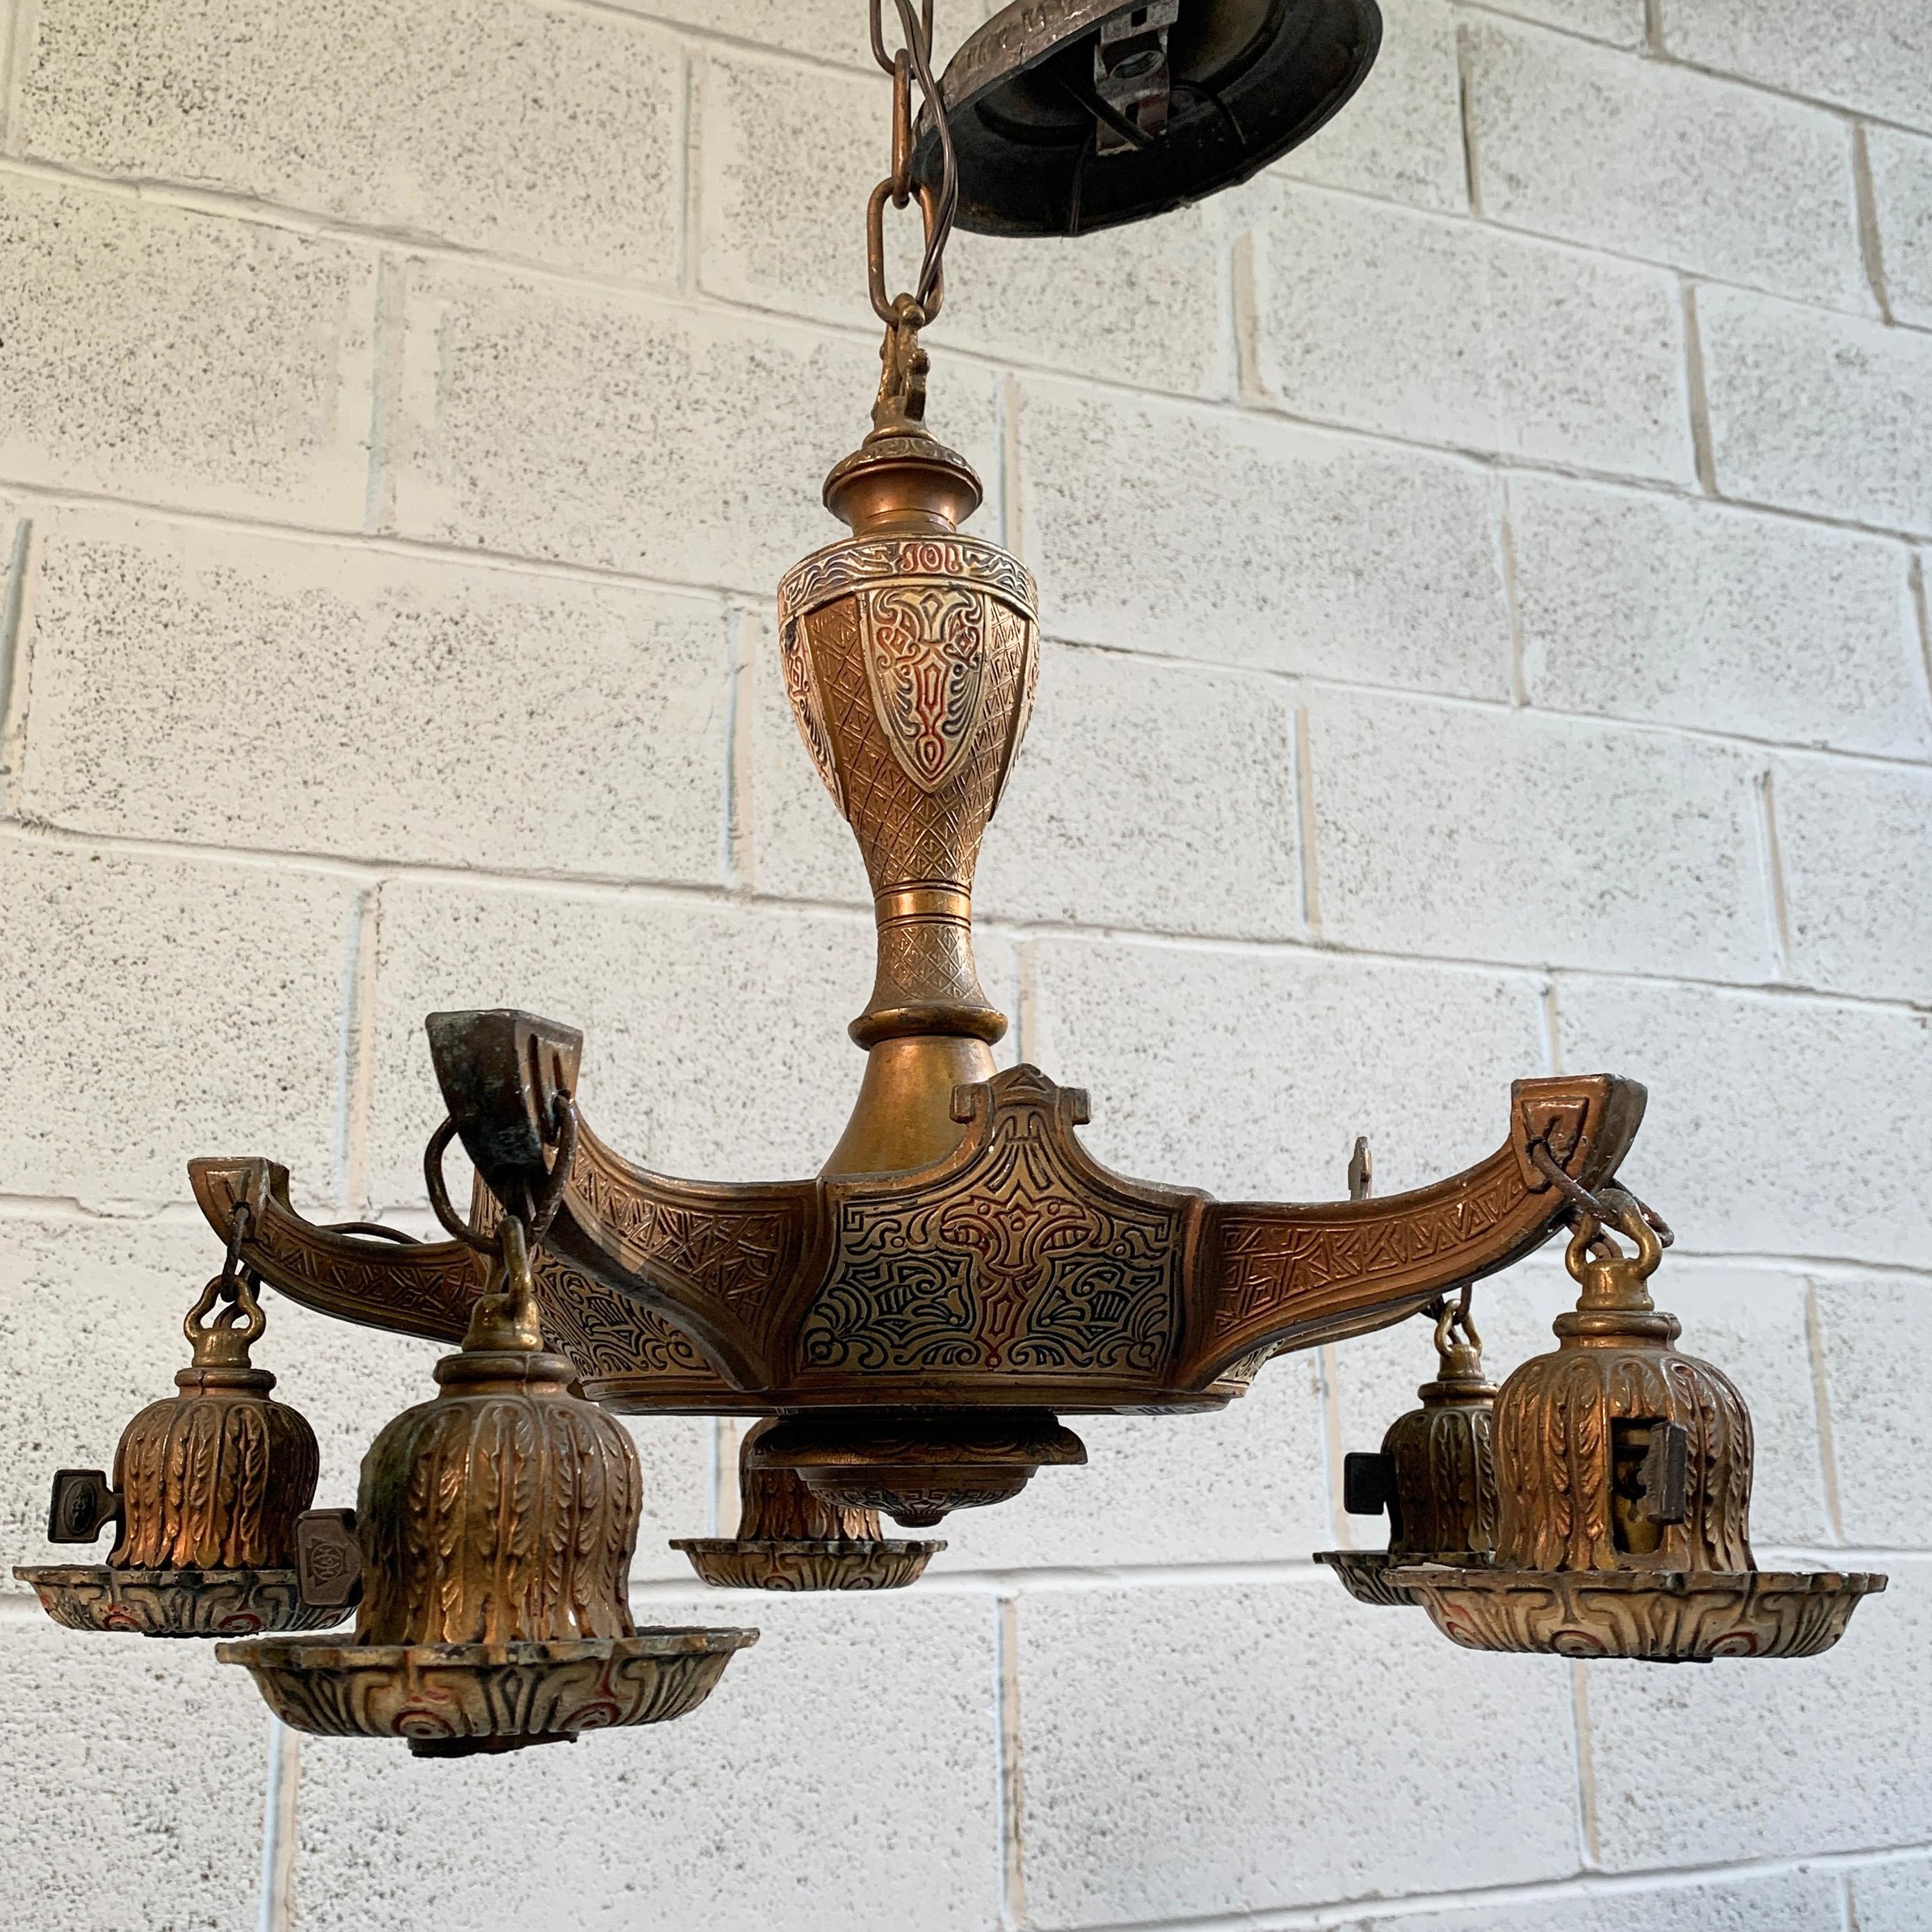 Early 20th century, embossed and painted, white metal, Moroccan chandelier accepts 5 hanging bulbs, up to 75 watts each with canopy. The chandelier hangs at 48